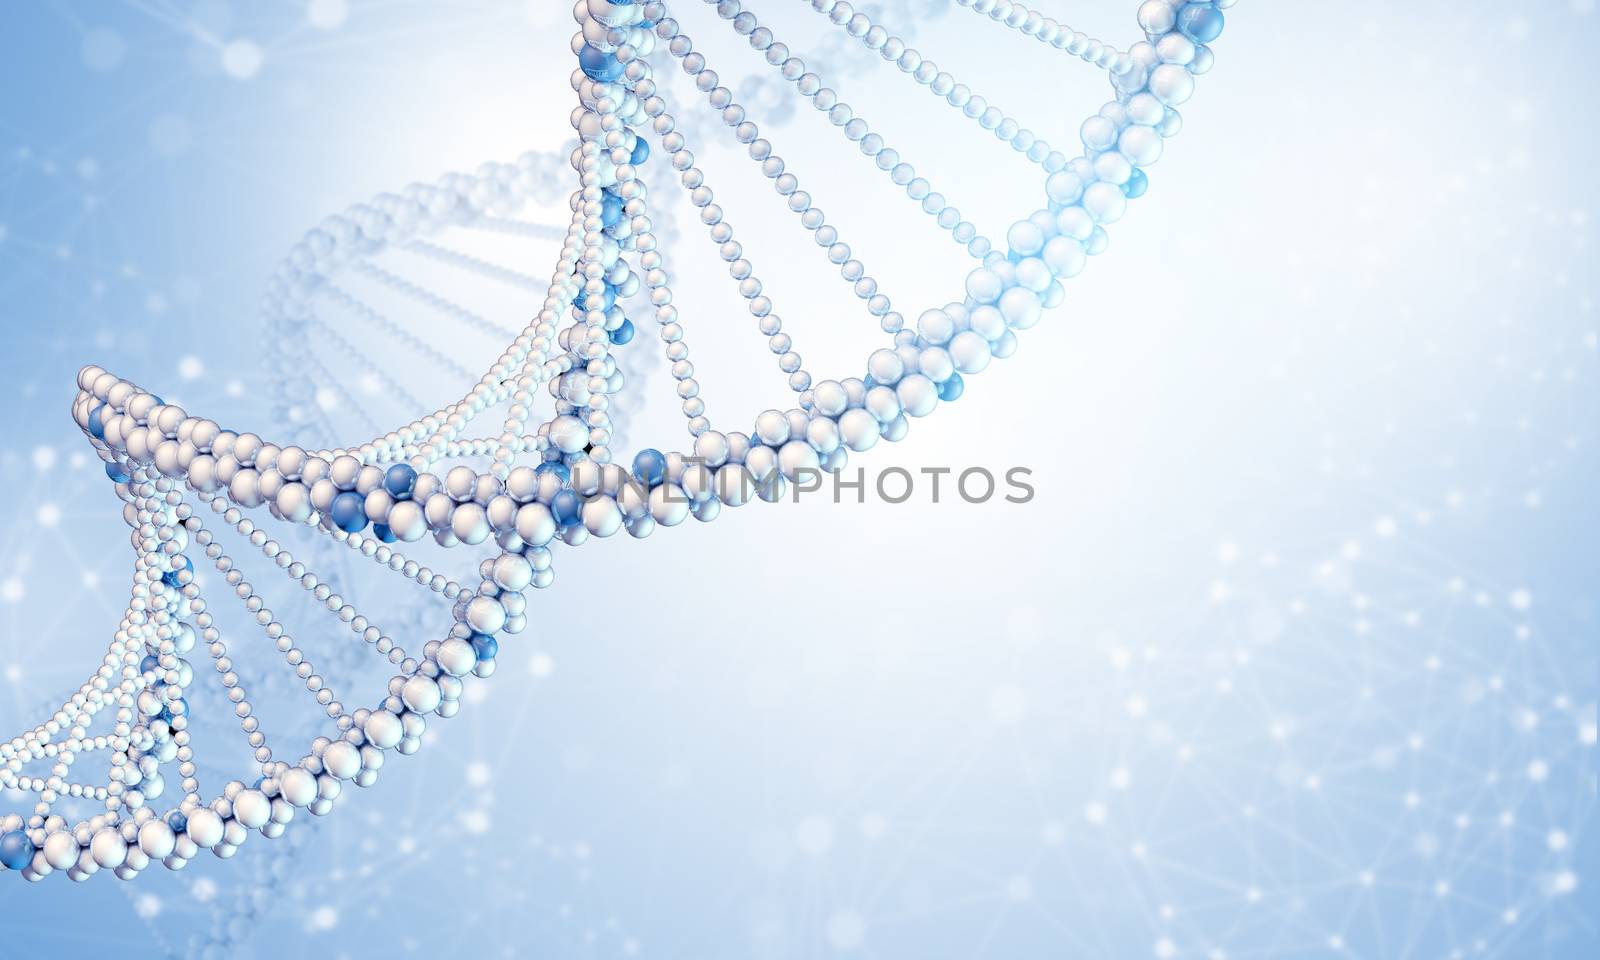 DNA model with blured wire-frame spheres. Blue gradient background